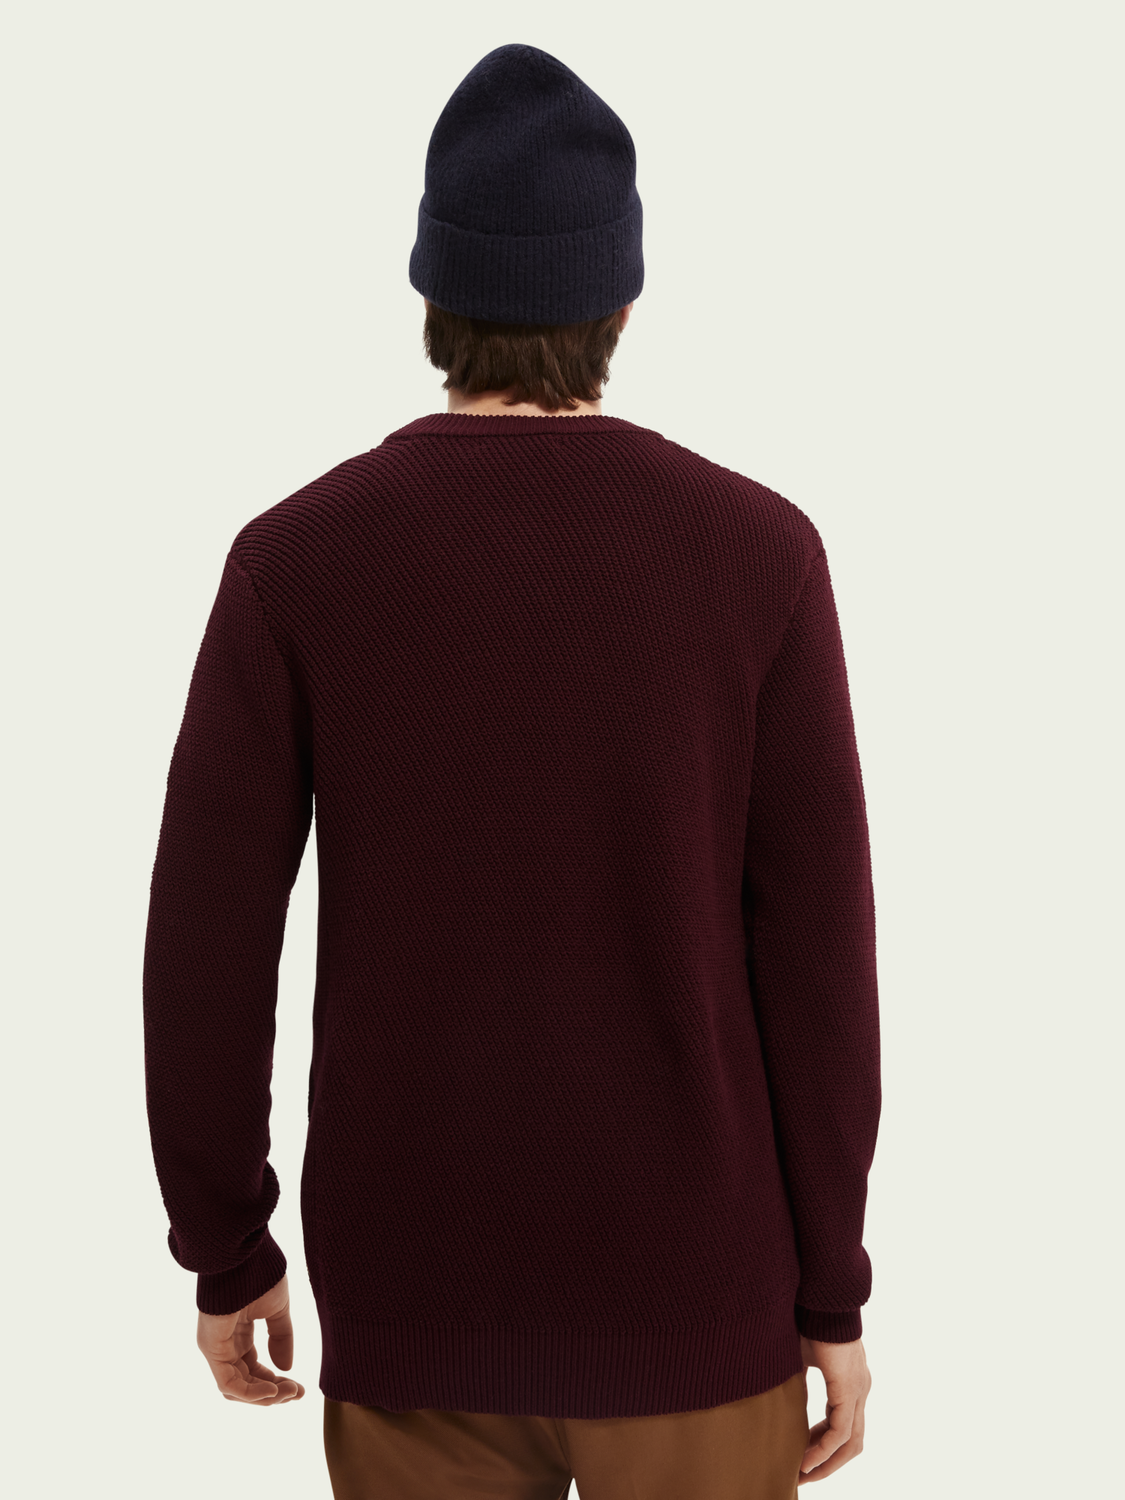 Scotch & Soda - Knitted Pullover - Bordeaux Border